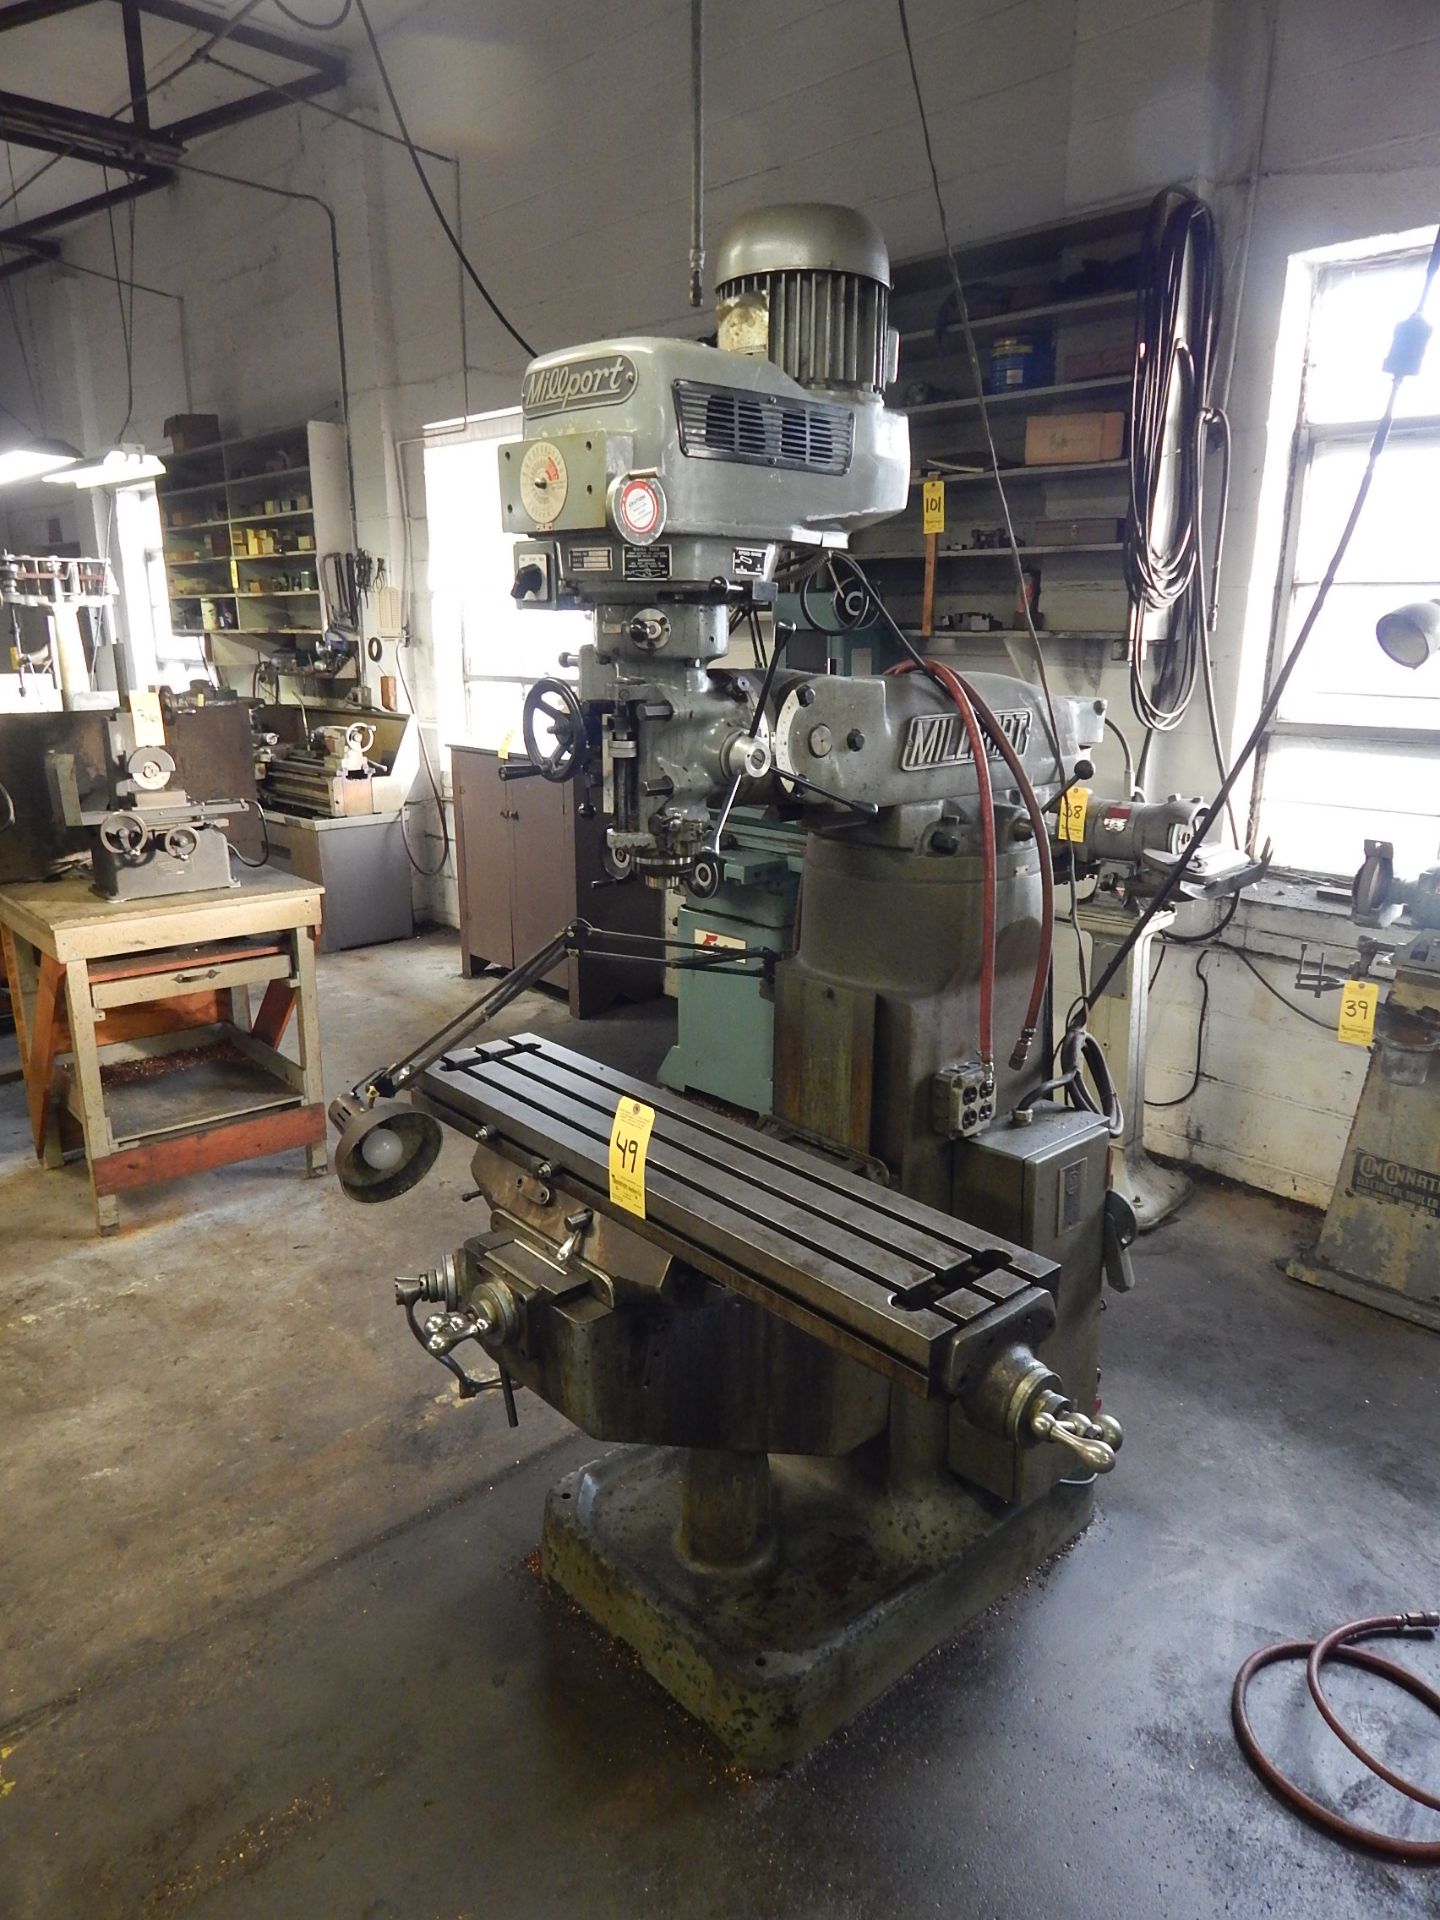 Millport Model 3VH, 2 HP Variable Speed Vertical Mill, 9" X 42" Table, s/n 85158, - Image 2 of 4